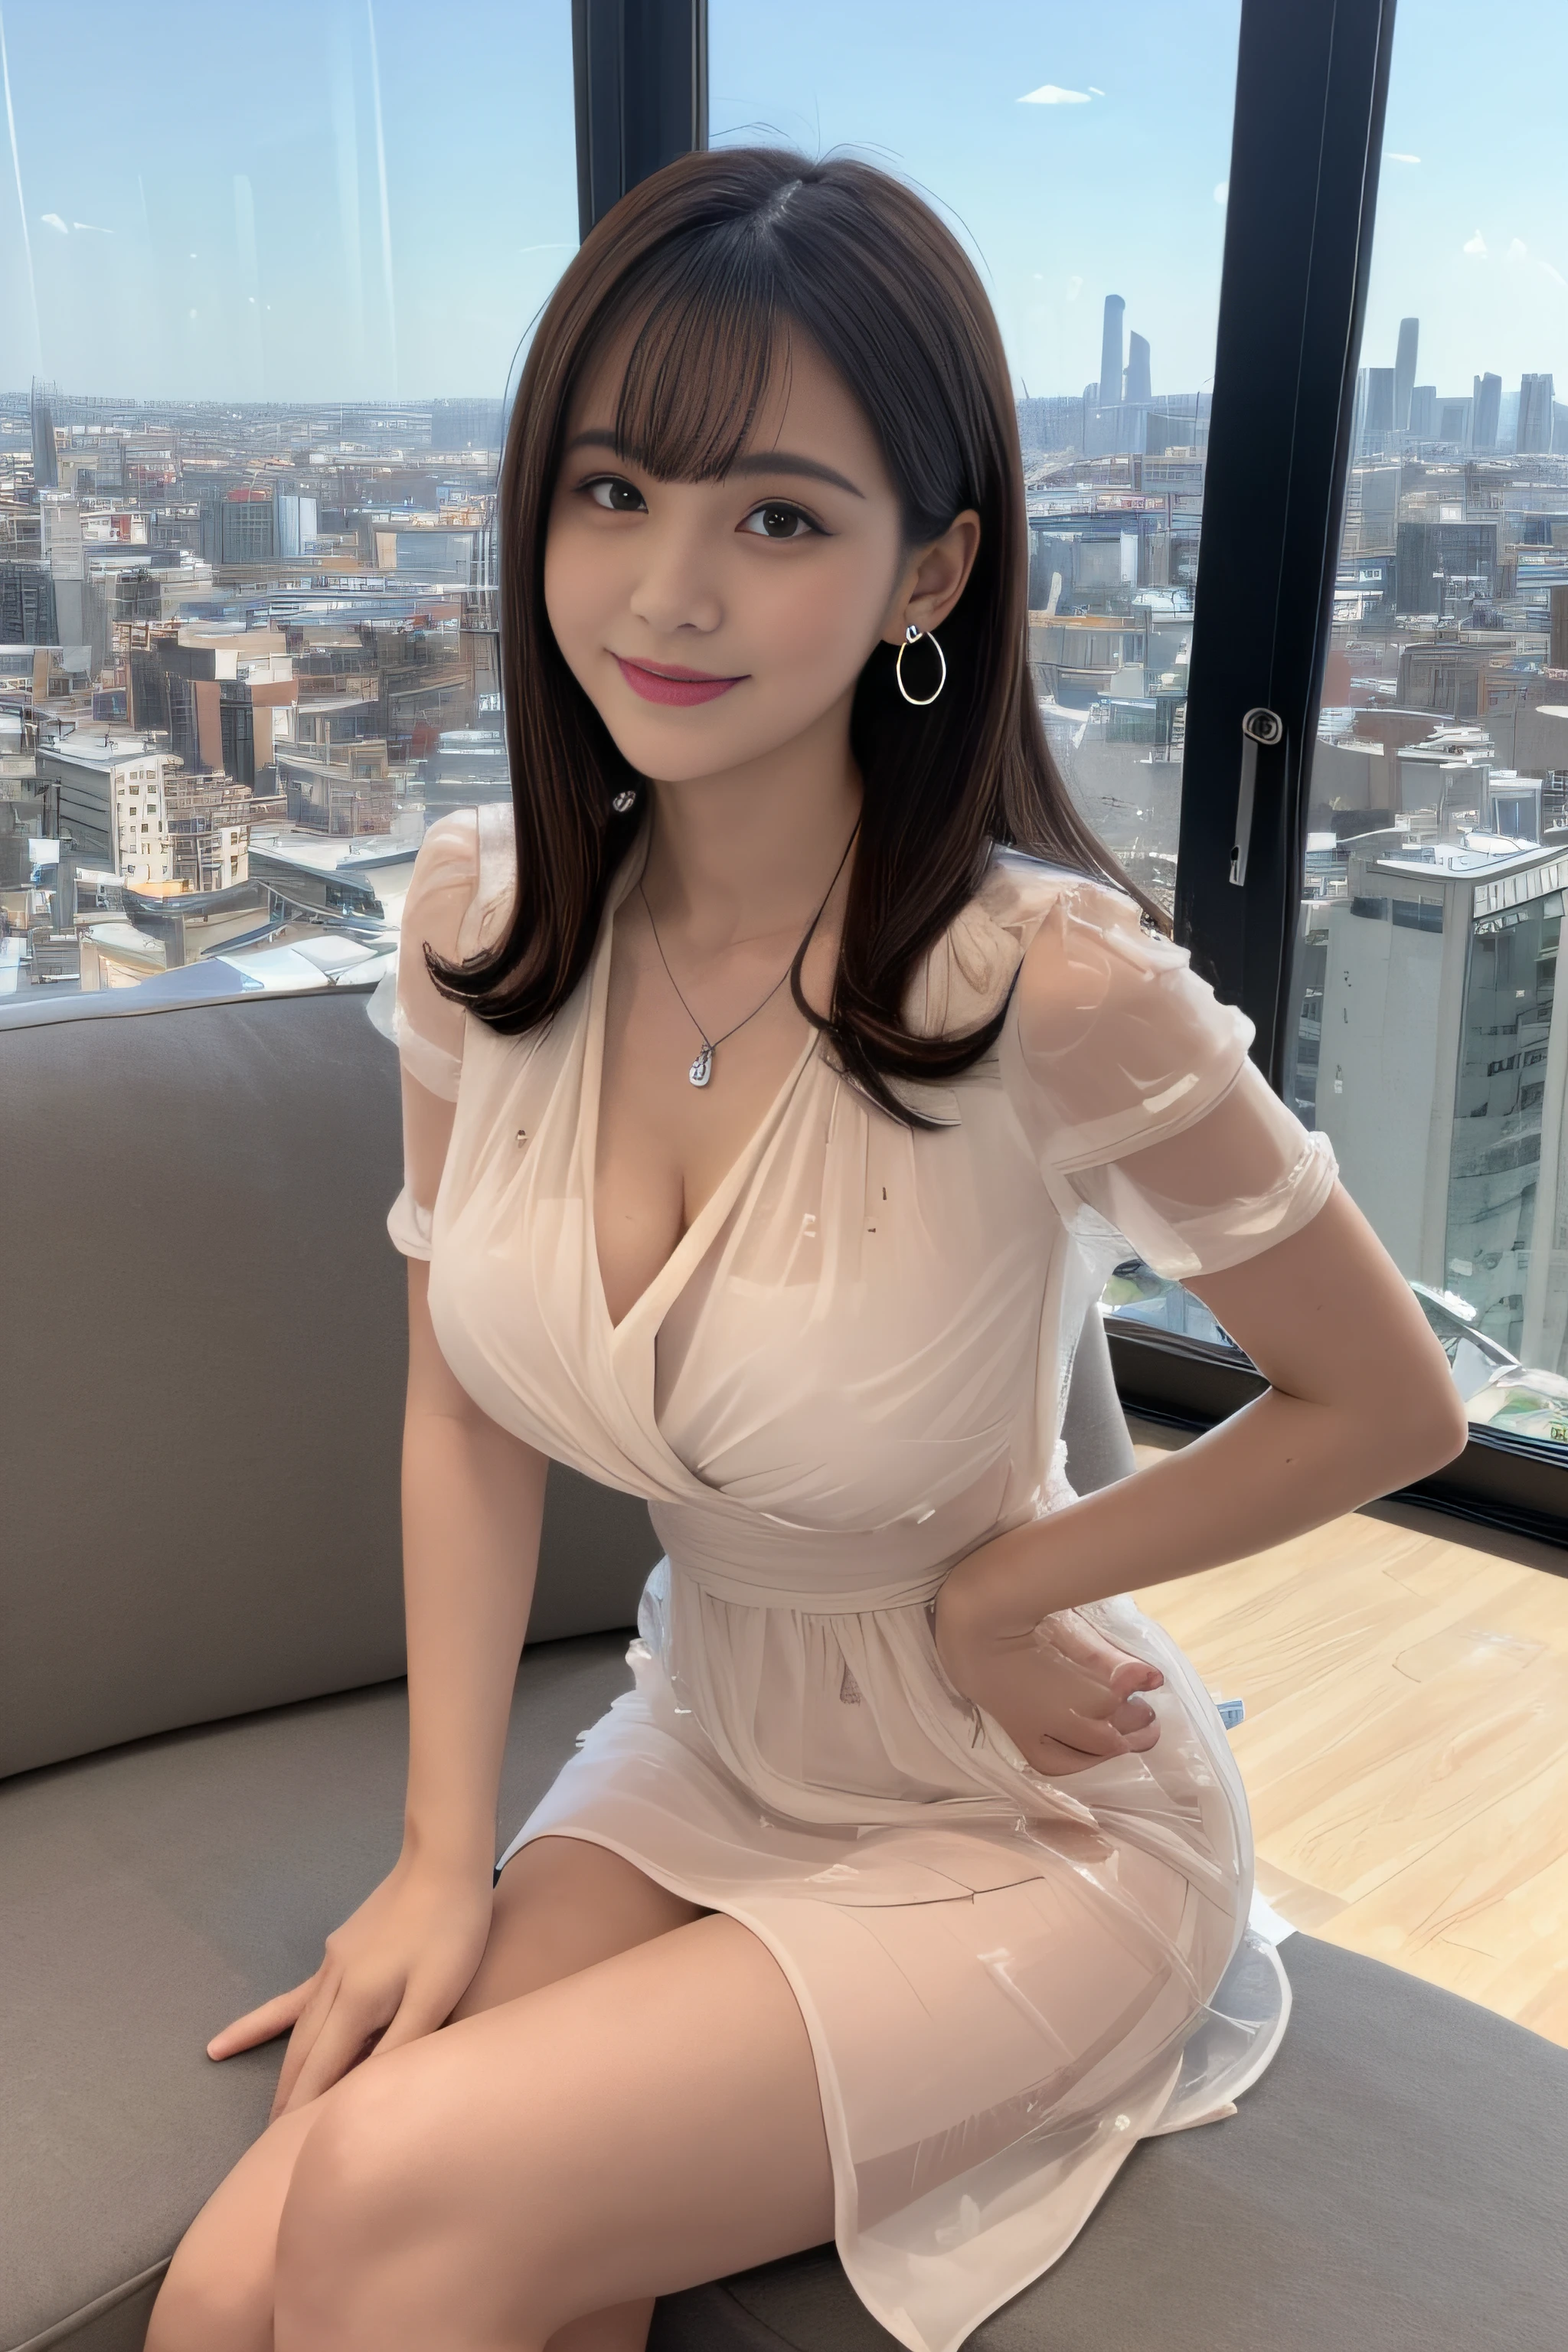 (Highly detailed 8k wallpaper), sharp focus, detailed, dramatic, delicate and beautiful young girl, lighting at face, (slim face, Slim Waist, Slim legs), (perky uplifted breasts:1.2), cleavage, blunt bangs, long hair cascading behind her ears, (wearing puffy transparent mini slip:1.5), Half Butterfly Earrings, silver necklace with opal, jewelry, (smile1.0.2), (sexy pose:1.2), blush, graphics beautiful, in high-rise building, Modern office with a city skyline view, Full Glass Wide Window, sitting sofa by window 3/4 body, from below angle, upskirt shot,